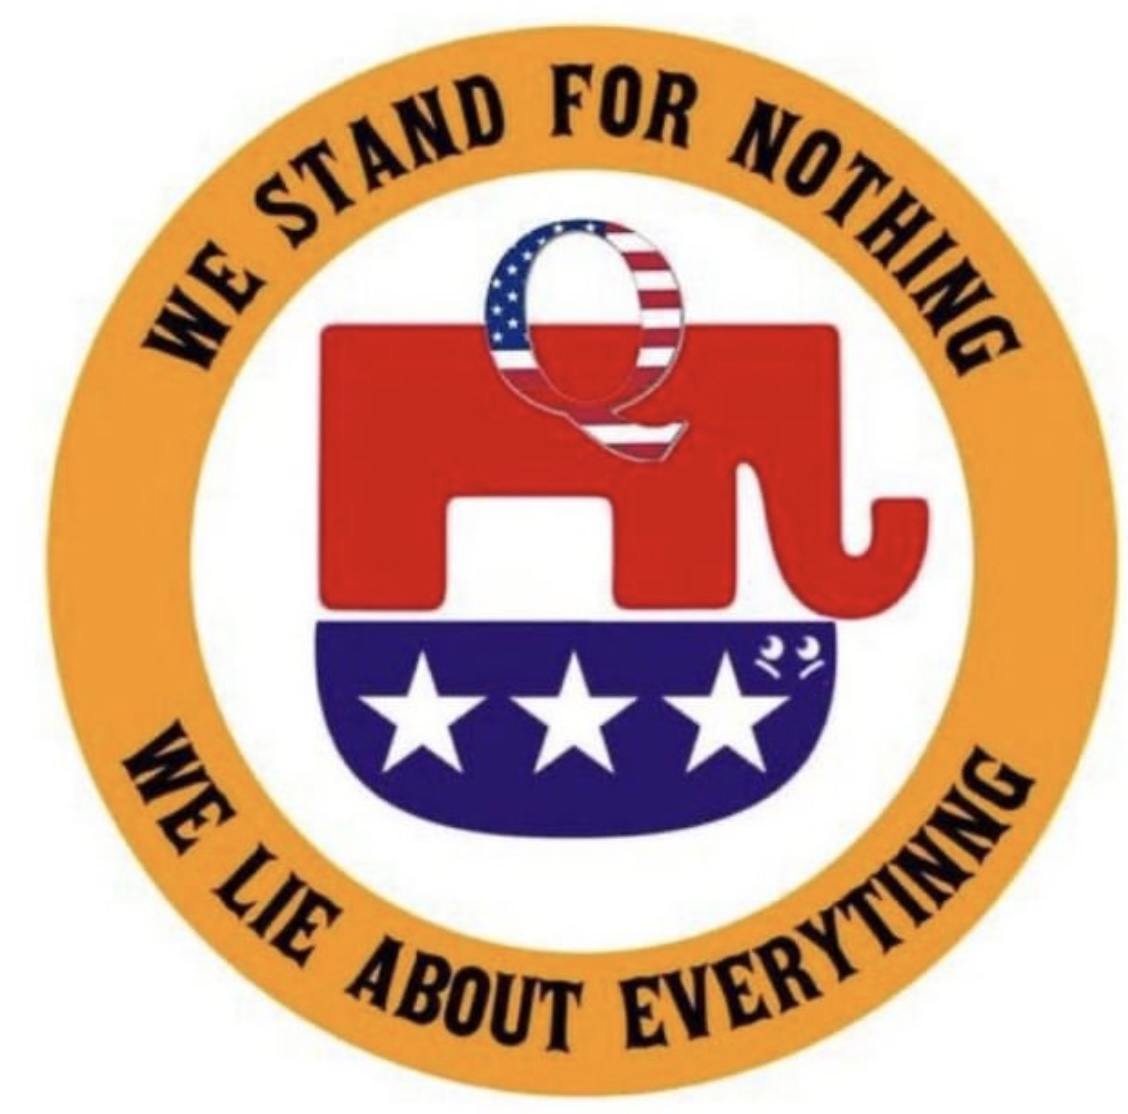 Thank you @gtconway3d for using the correct word: LIE! 3 little letters=L-I-E @GOP always lie Q: How do you know? A: Their lips are moving! 'Lips Moving - Lies Spewing' is the #1 rule to join @AccountableGOP #GOPLiesAboutEverything